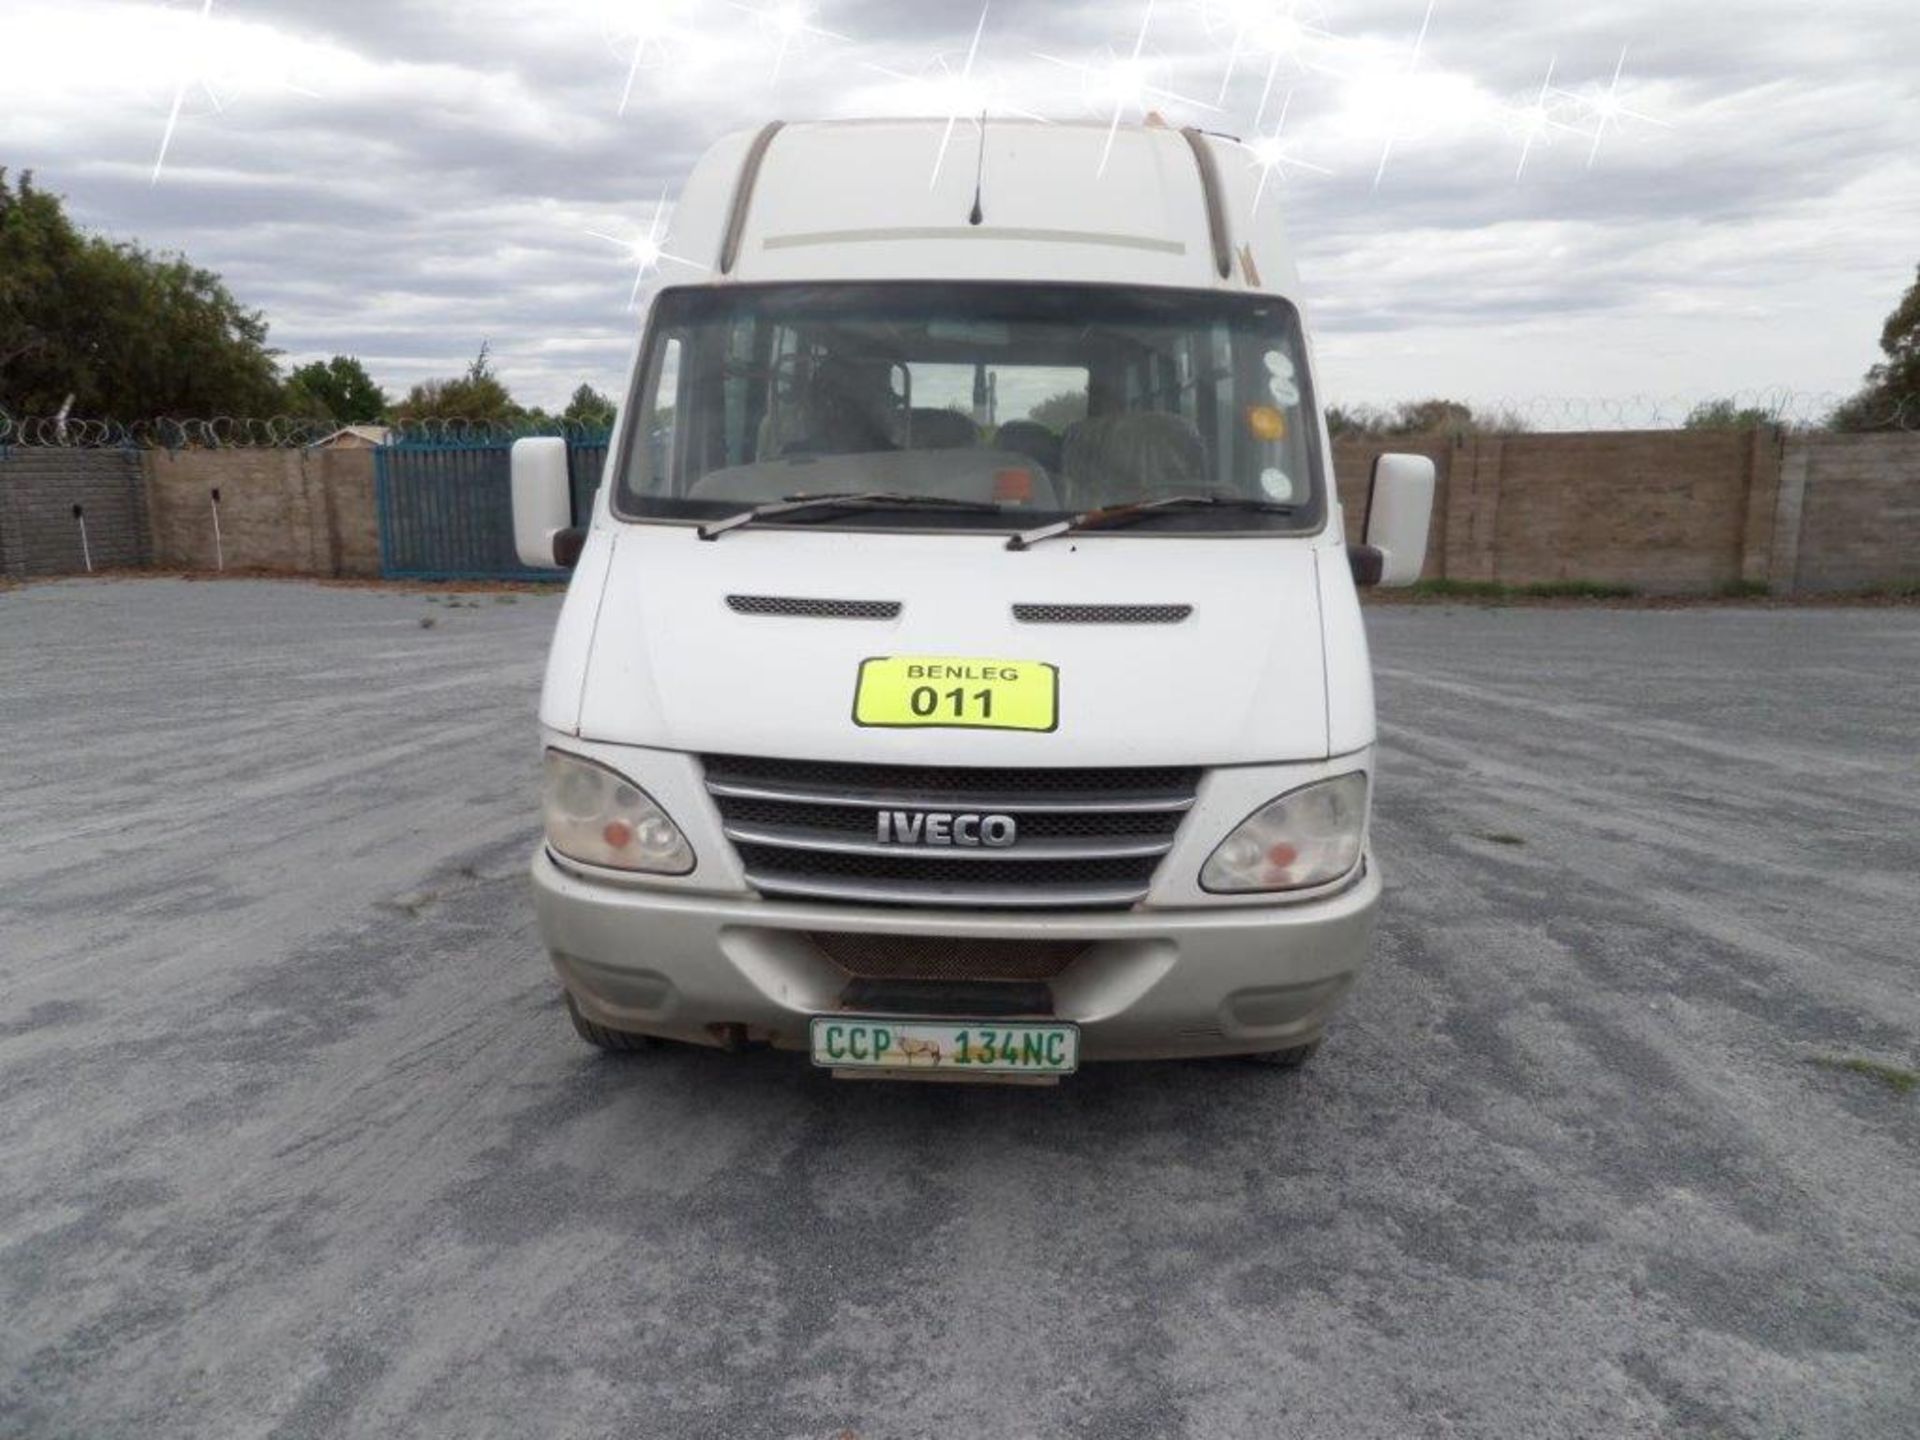 2011 Iveco  Powerdaily (20Seater)